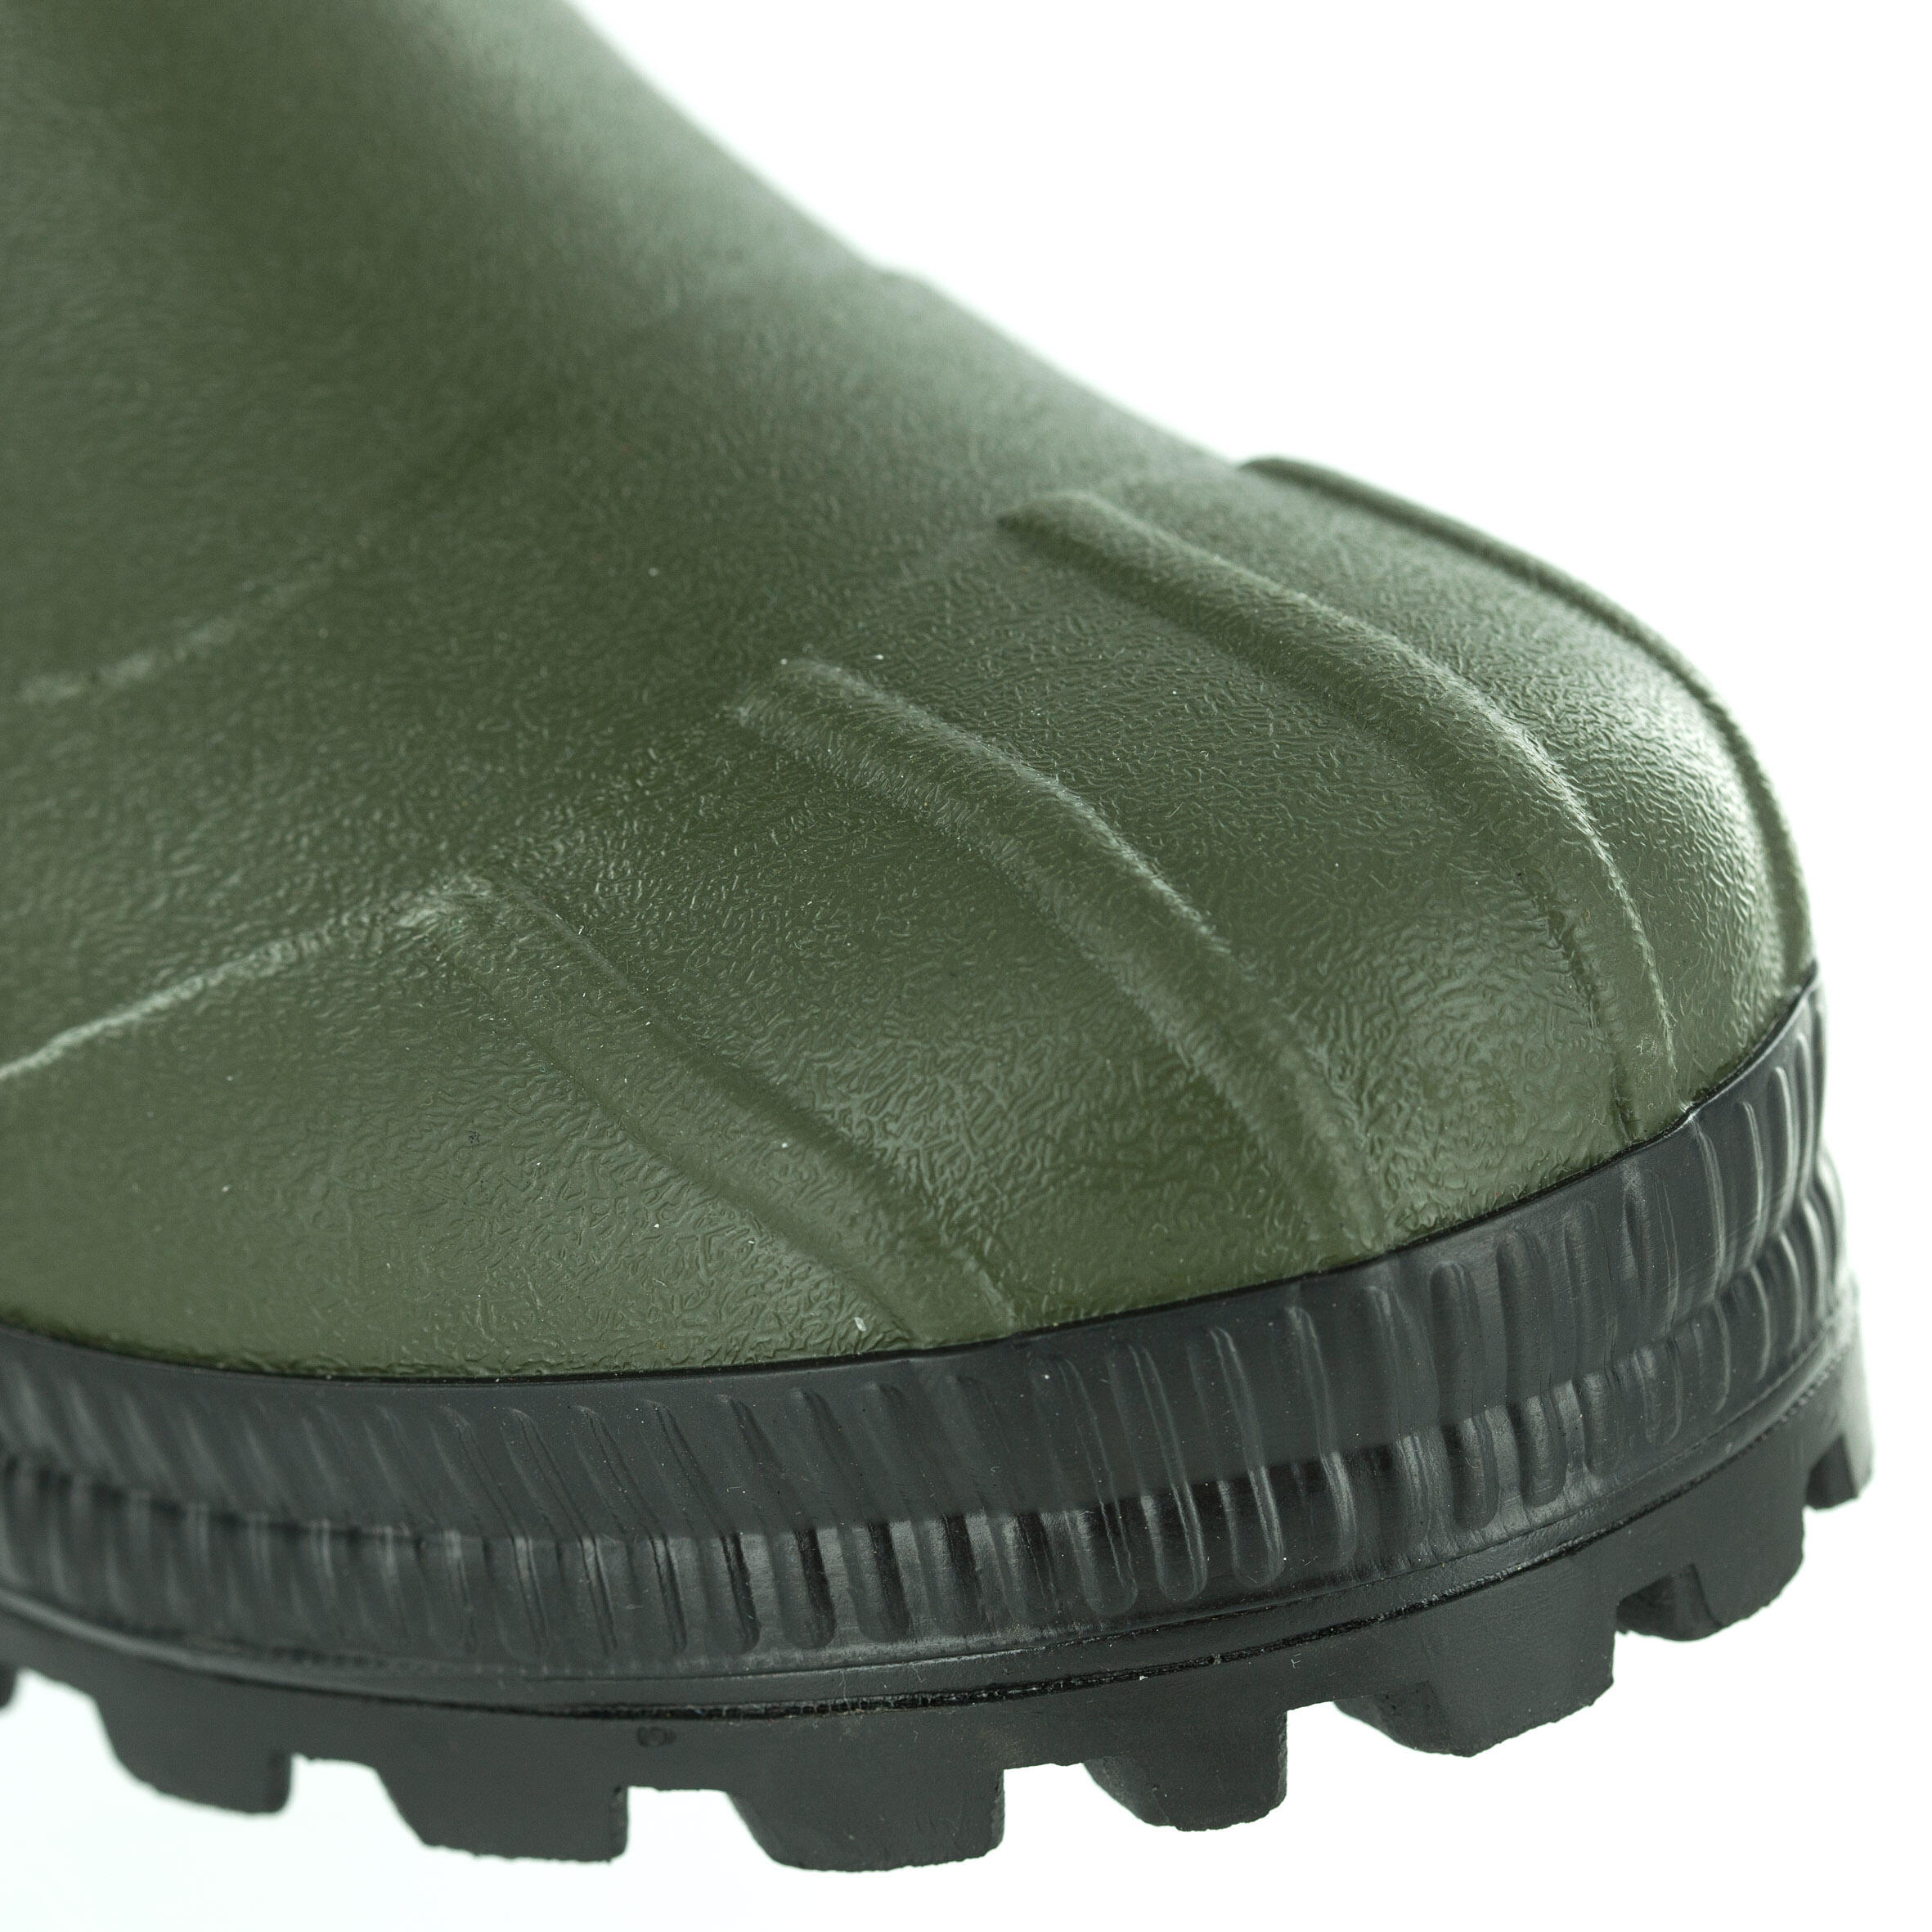 Toundra 500 short wellies with removable liner - Green 7/8